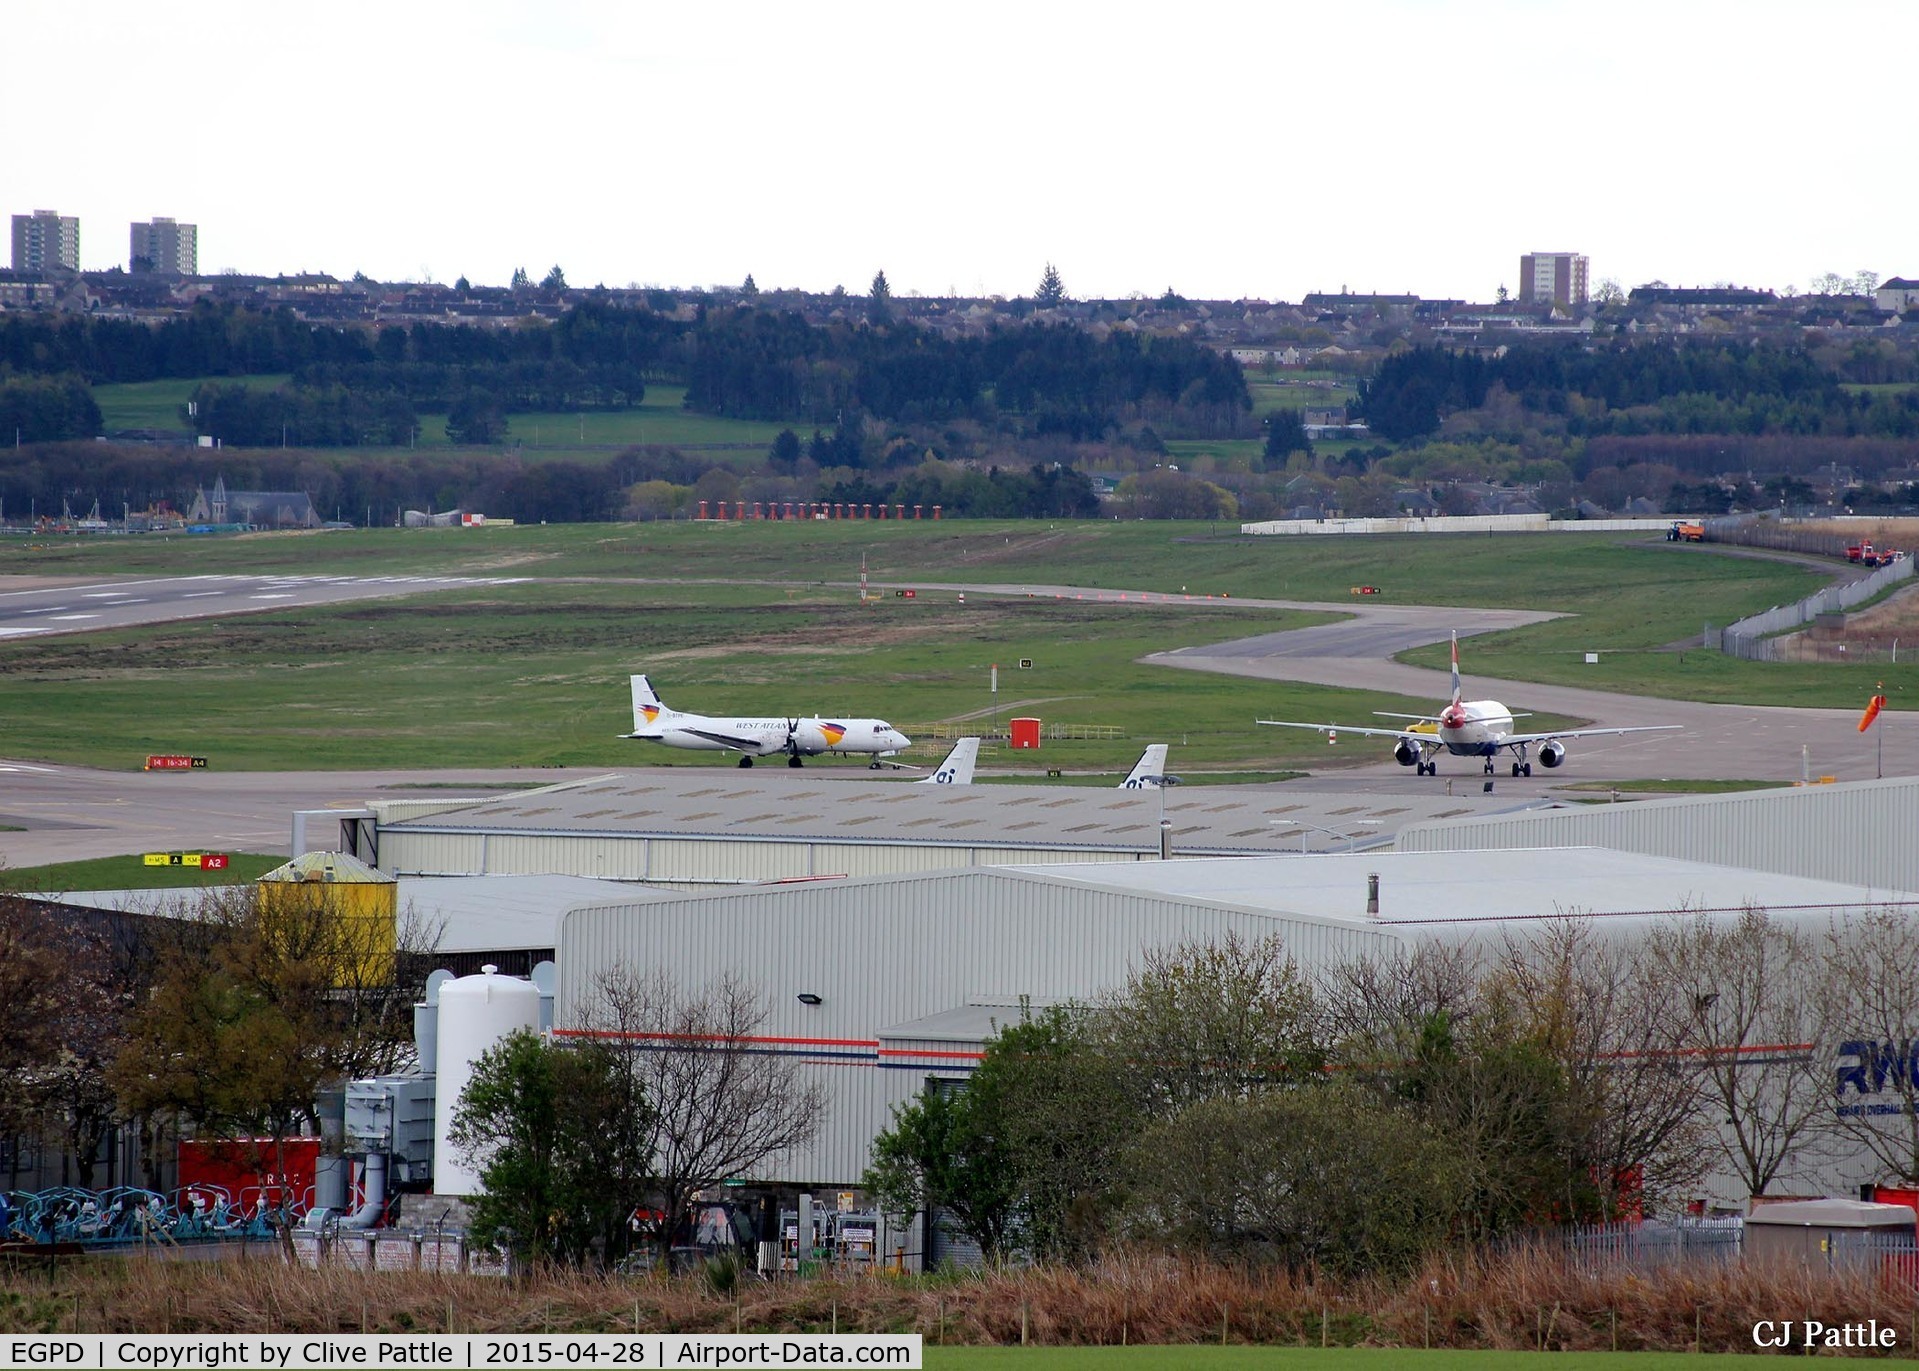 Aberdeen Airport, Aberdeen, Scotland United Kingdom (EGPD) - Looking South-Southeast across the airport at Aberdeen EGPD with a BA A320 taxying to the gate past a parked BAe ATP of West Atlantic Cargo.